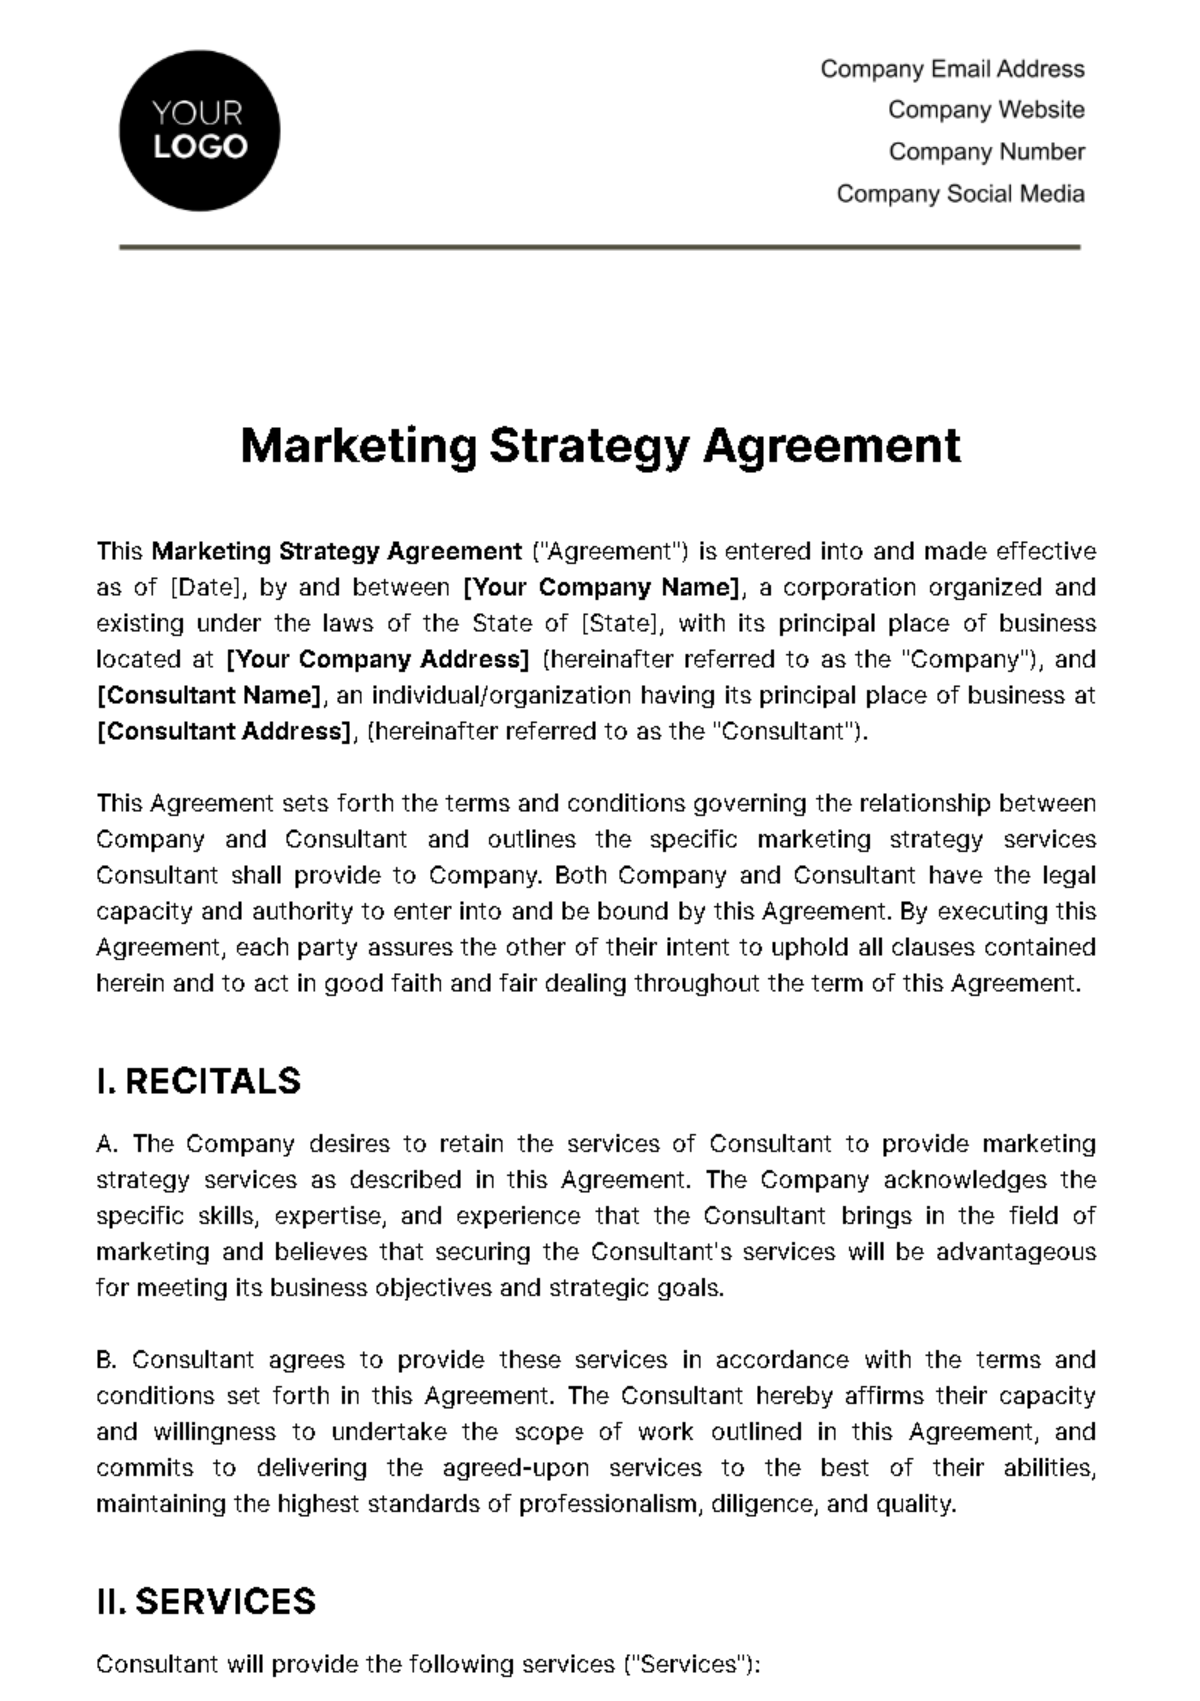 Marketing Strategy Agreement Template